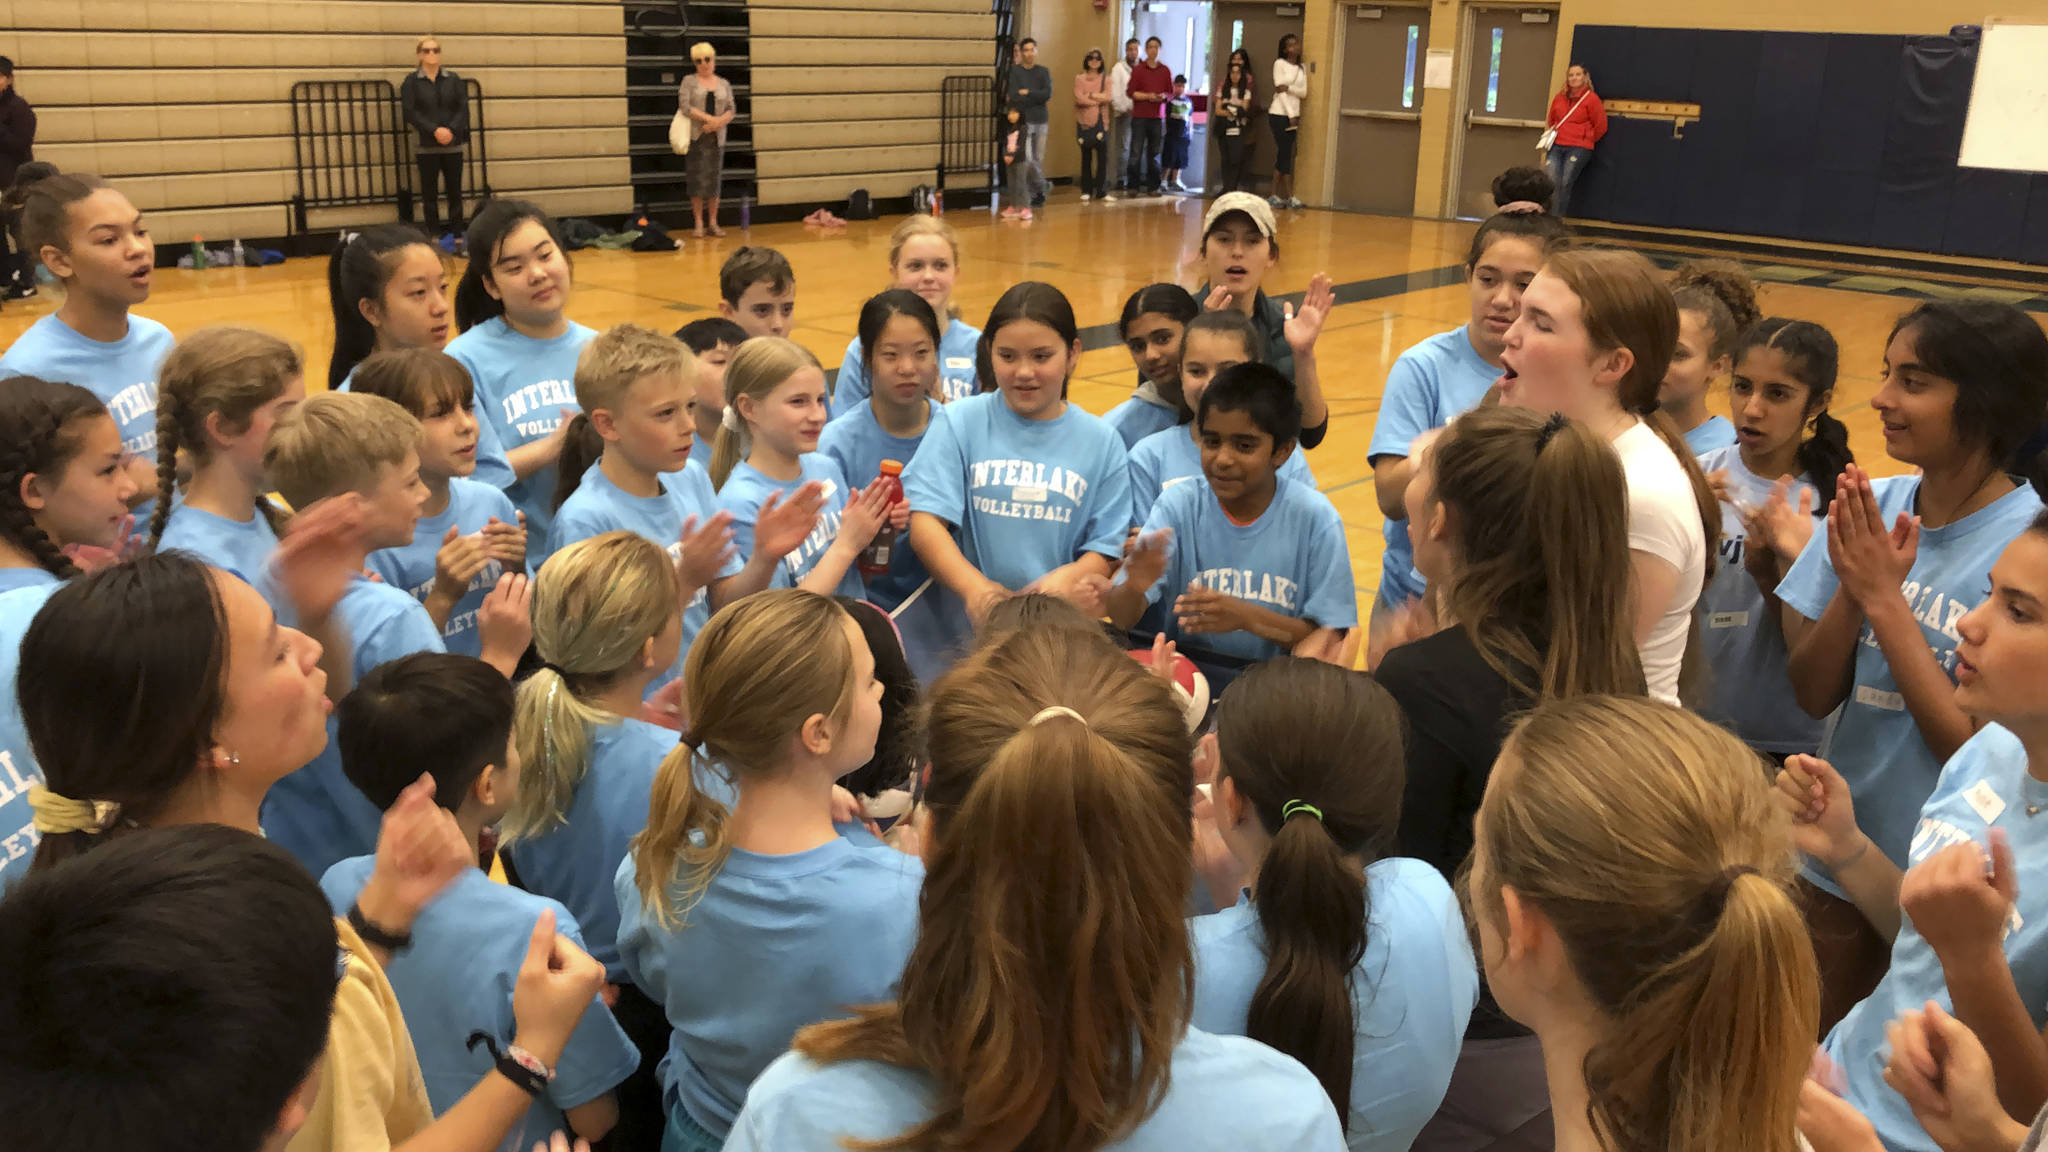 The Interlake Saints summer youth volleyball camp took place from June 24-26 at Interlake High School. Photo courtesy of Eduardo Guerrero